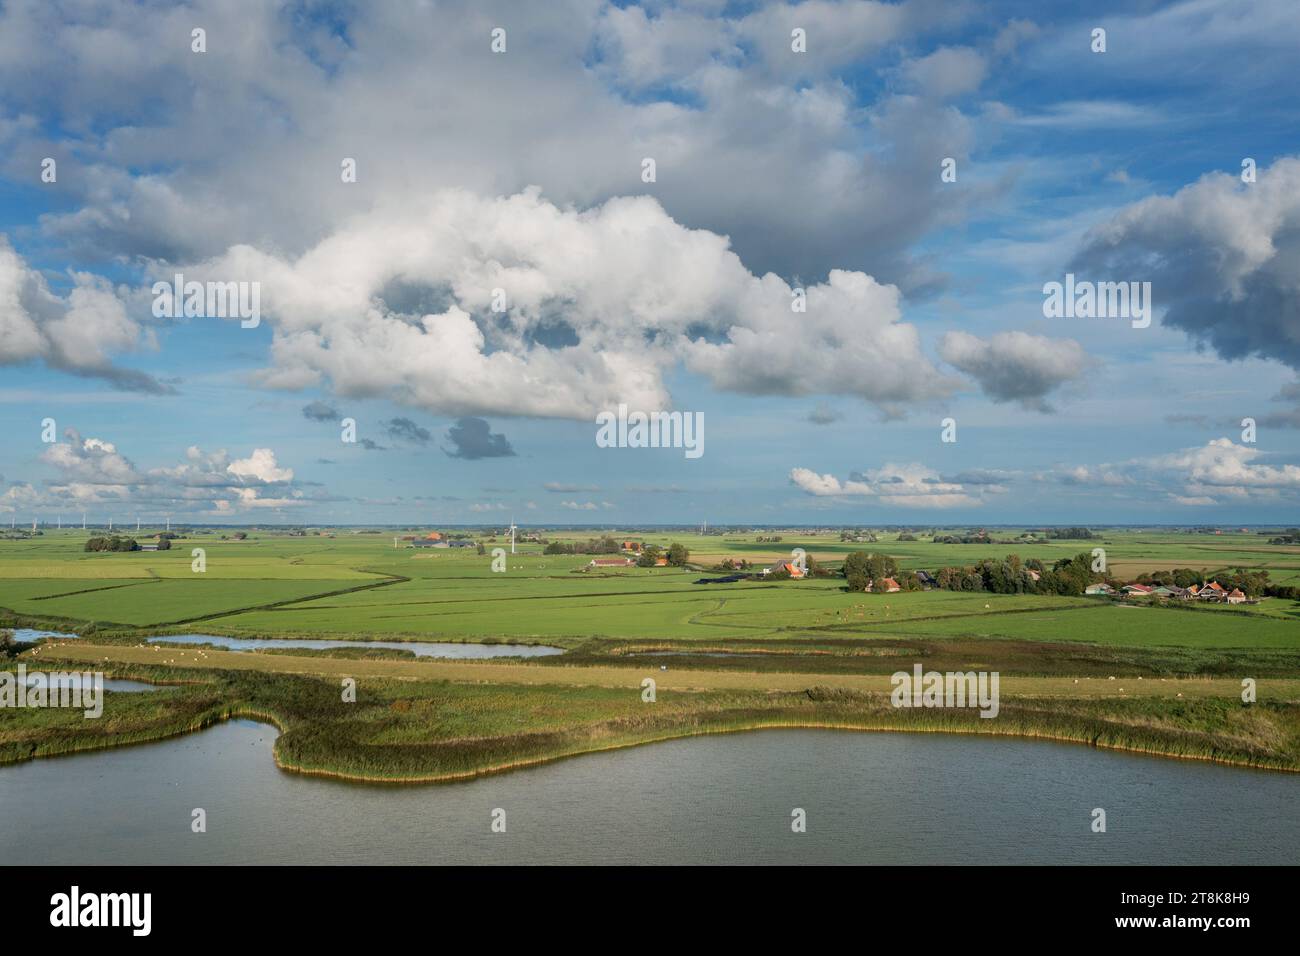 agricultural landscape and IJsselmeer coast, aerial view, Netherlands, Frisia, Gaast Stock Photo